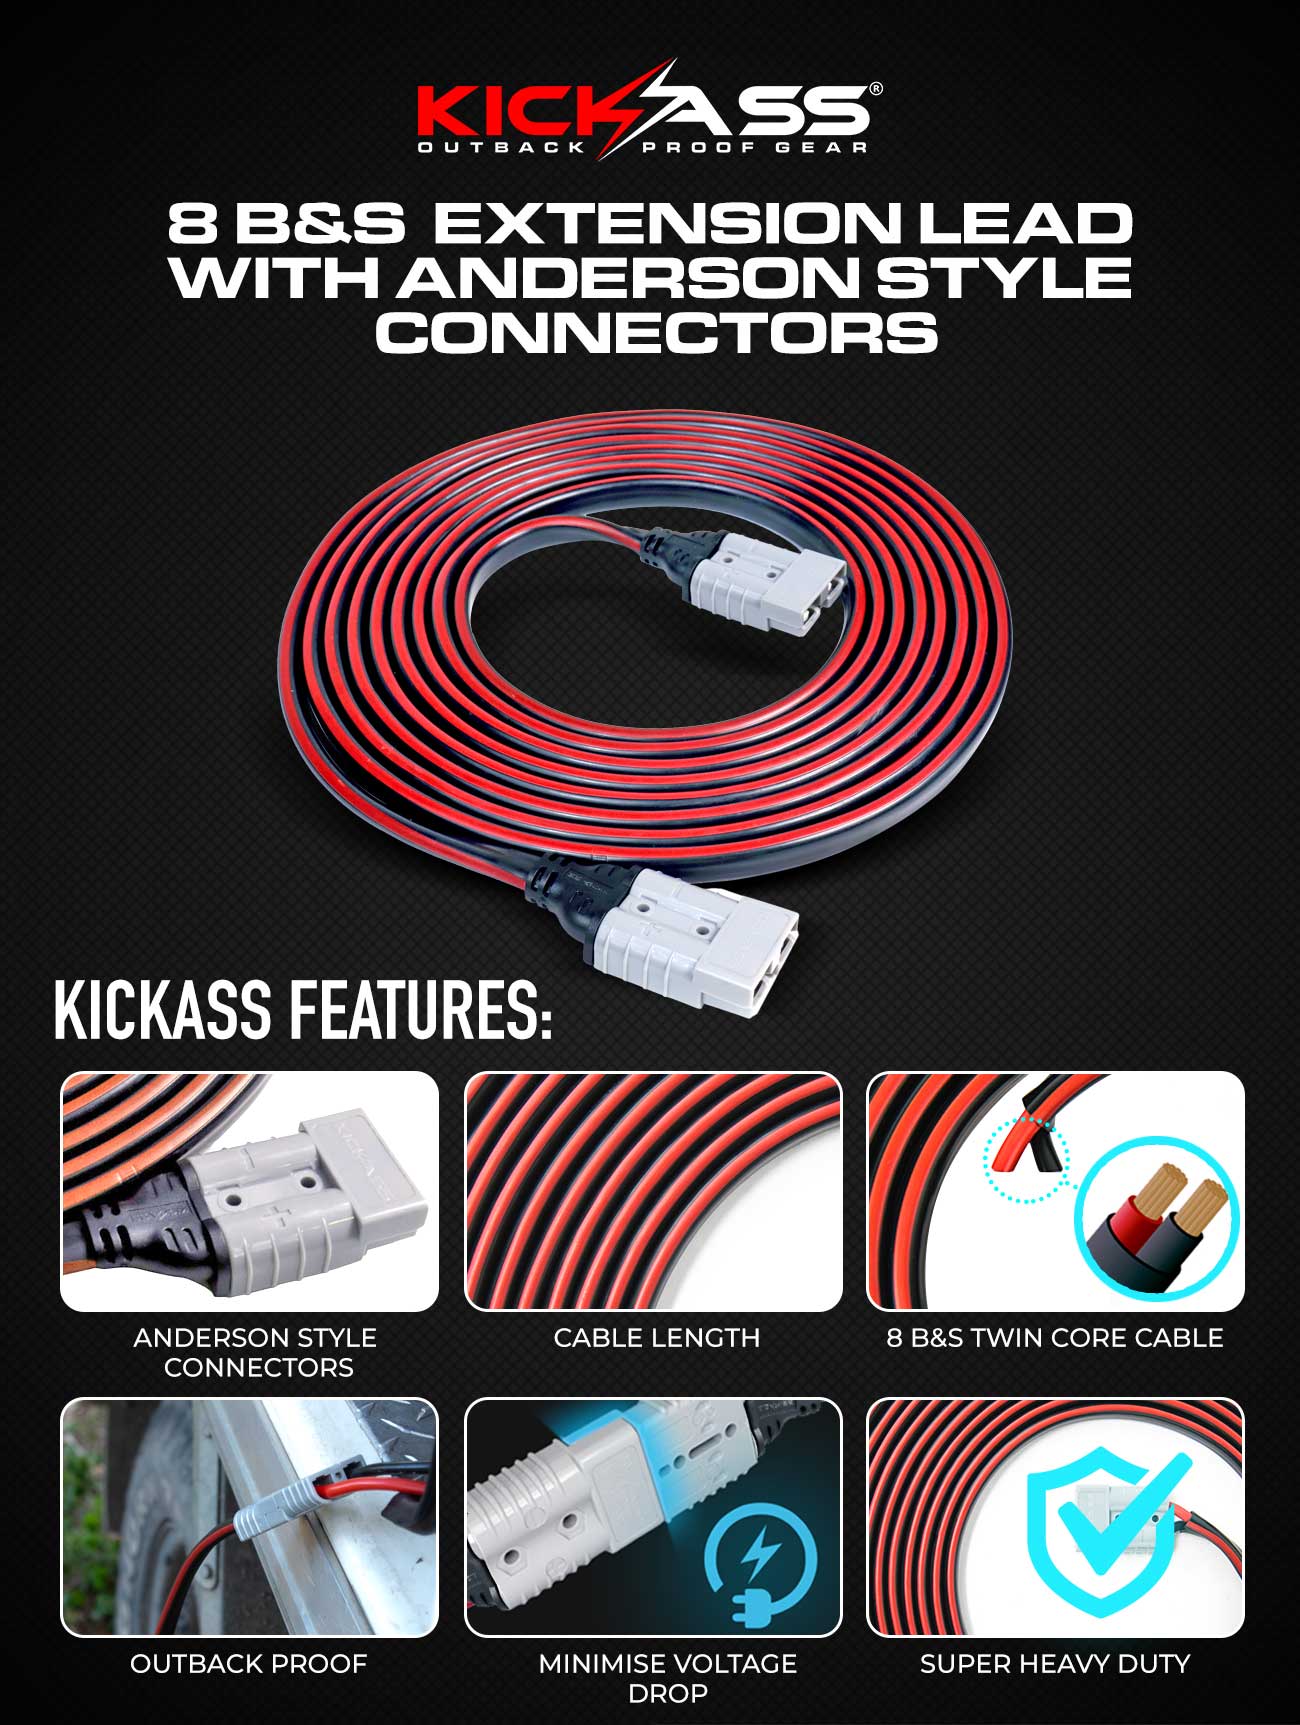 KickAss 8B&S 5 Metre Extension Lead With Anderson Style Connectors